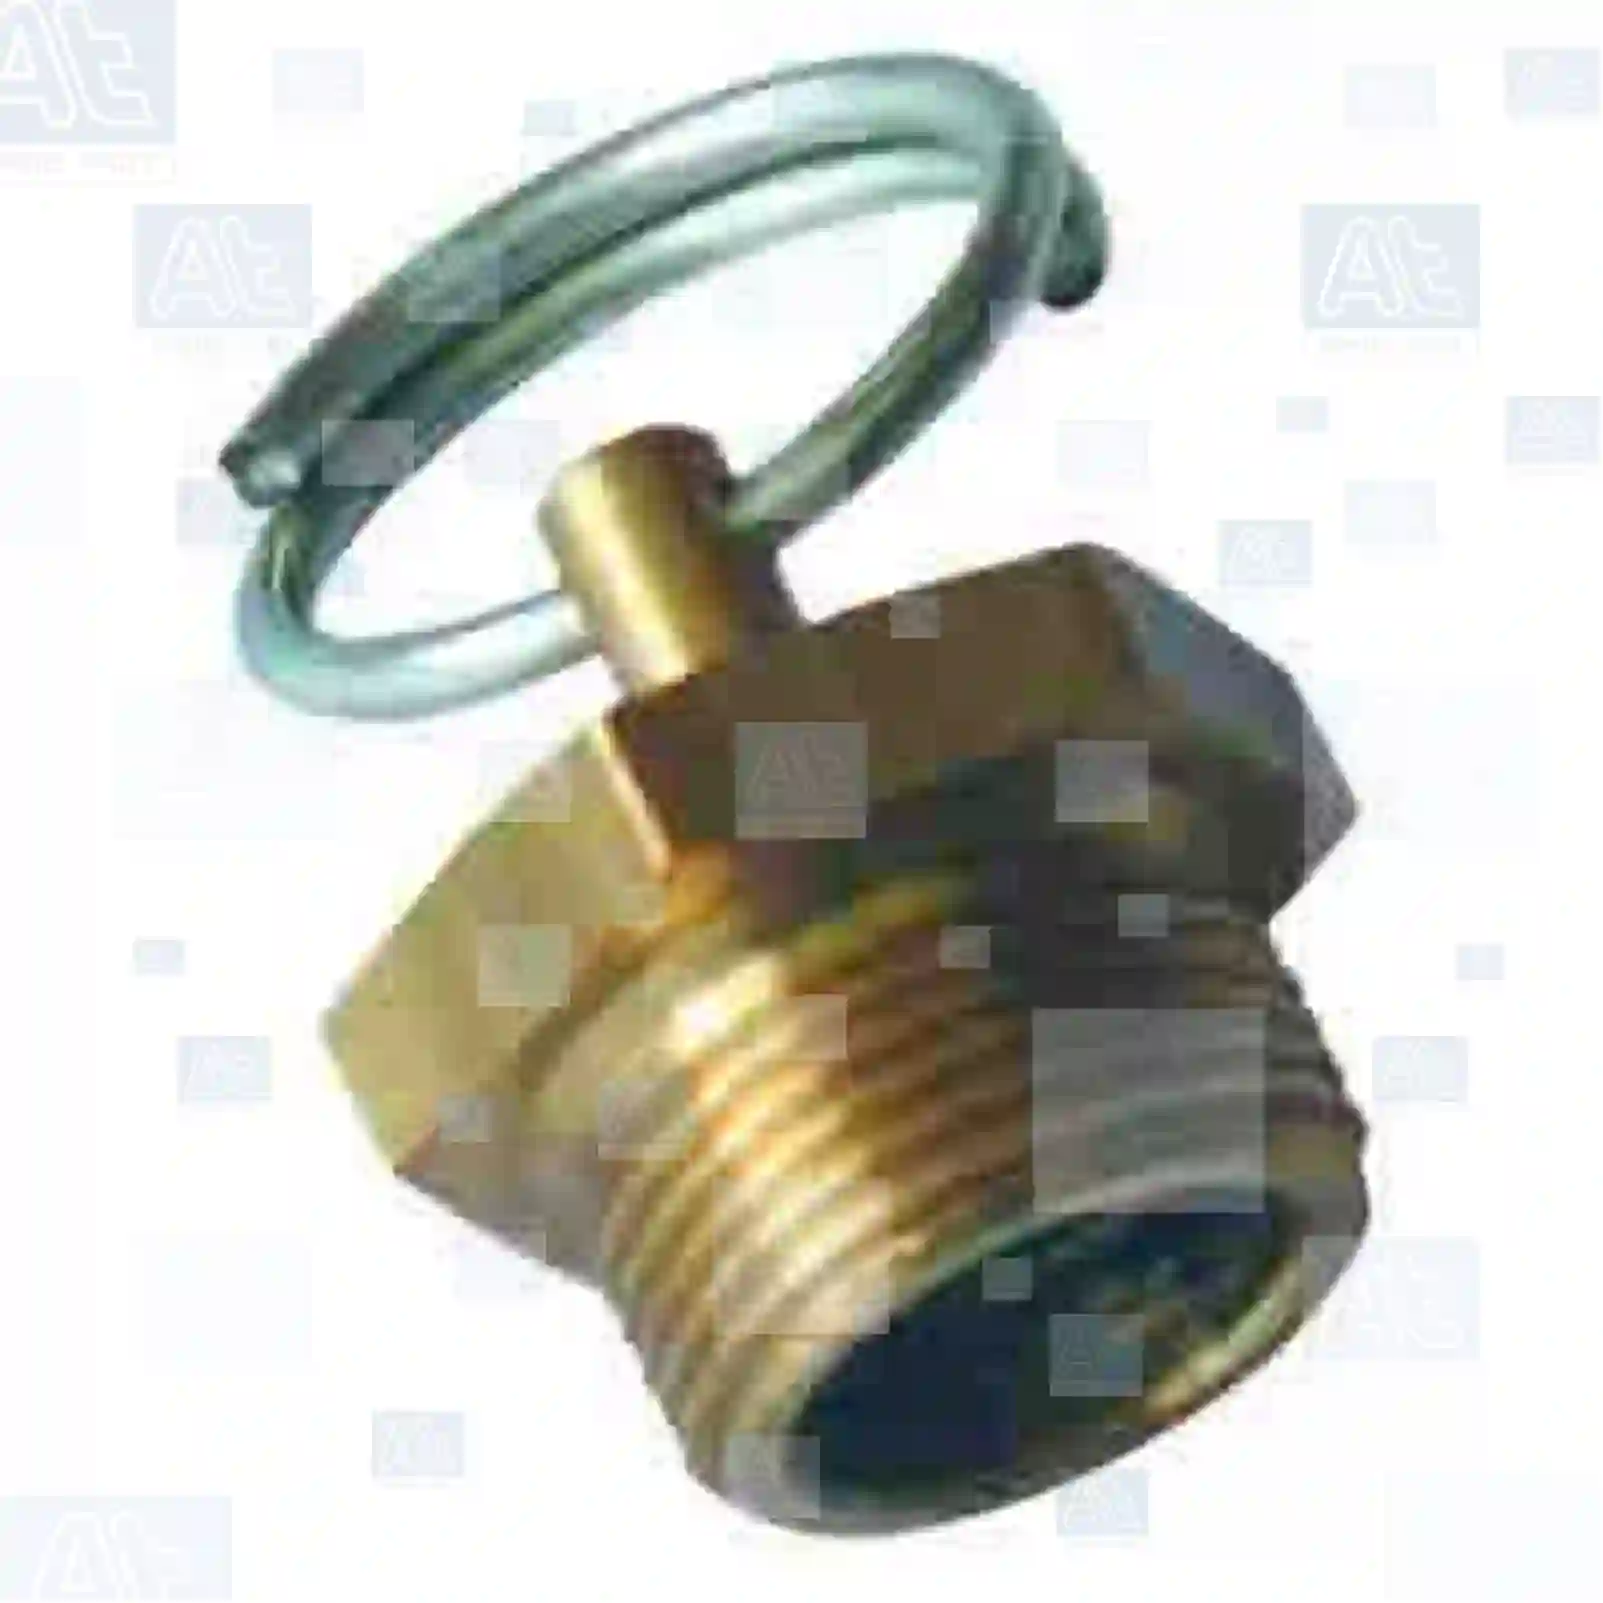 Water drain valve, at no 77713802, oem no: 605253000, 0201107, 0505294, 1443387, 1782075, 201107, 505294, 01260634, 02486790, 02520243, 03423526, 04457267, 04672326, 04741164, 04788568, 1260634, 2486790, 2520243, 3423526, 42021336, 4457267, 4672326, 4788568, 500304229, 61578024, 502921908, 81512605003, 81512606002, 81512606003, 81512606040, 81512606041, 81512606042, 81512607002, 81512607003, 81512607004, 90810214230, 0004311206, 0004320407, 0004320607, 0004320807, 0004321107, 0004321307, 0004321907, 0004322007, 0004322107, 0004322407, 3454300281, 110267400, 495129, AIFO843, 0110701400, 4425003400, 124404, 1382866, 1403463, 295499, 295500, 303501, 606639, 341425, 6626859, 795035, ZG50843-0008 At Spare Part | Engine, Accelerator Pedal, Camshaft, Connecting Rod, Crankcase, Crankshaft, Cylinder Head, Engine Suspension Mountings, Exhaust Manifold, Exhaust Gas Recirculation, Filter Kits, Flywheel Housing, General Overhaul Kits, Engine, Intake Manifold, Oil Cleaner, Oil Cooler, Oil Filter, Oil Pump, Oil Sump, Piston & Liner, Sensor & Switch, Timing Case, Turbocharger, Cooling System, Belt Tensioner, Coolant Filter, Coolant Pipe, Corrosion Prevention Agent, Drive, Expansion Tank, Fan, Intercooler, Monitors & Gauges, Radiator, Thermostat, V-Belt / Timing belt, Water Pump, Fuel System, Electronical Injector Unit, Feed Pump, Fuel Filter, cpl., Fuel Gauge Sender,  Fuel Line, Fuel Pump, Fuel Tank, Injection Line Kit, Injection Pump, Exhaust System, Clutch & Pedal, Gearbox, Propeller Shaft, Axles, Brake System, Hubs & Wheels, Suspension, Leaf Spring, Universal Parts / Accessories, Steering, Electrical System, Cabin Water drain valve, at no 77713802, oem no: 605253000, 0201107, 0505294, 1443387, 1782075, 201107, 505294, 01260634, 02486790, 02520243, 03423526, 04457267, 04672326, 04741164, 04788568, 1260634, 2486790, 2520243, 3423526, 42021336, 4457267, 4672326, 4788568, 500304229, 61578024, 502921908, 81512605003, 81512606002, 81512606003, 81512606040, 81512606041, 81512606042, 81512607002, 81512607003, 81512607004, 90810214230, 0004311206, 0004320407, 0004320607, 0004320807, 0004321107, 0004321307, 0004321907, 0004322007, 0004322107, 0004322407, 3454300281, 110267400, 495129, AIFO843, 0110701400, 4425003400, 124404, 1382866, 1403463, 295499, 295500, 303501, 606639, 341425, 6626859, 795035, ZG50843-0008 At Spare Part | Engine, Accelerator Pedal, Camshaft, Connecting Rod, Crankcase, Crankshaft, Cylinder Head, Engine Suspension Mountings, Exhaust Manifold, Exhaust Gas Recirculation, Filter Kits, Flywheel Housing, General Overhaul Kits, Engine, Intake Manifold, Oil Cleaner, Oil Cooler, Oil Filter, Oil Pump, Oil Sump, Piston & Liner, Sensor & Switch, Timing Case, Turbocharger, Cooling System, Belt Tensioner, Coolant Filter, Coolant Pipe, Corrosion Prevention Agent, Drive, Expansion Tank, Fan, Intercooler, Monitors & Gauges, Radiator, Thermostat, V-Belt / Timing belt, Water Pump, Fuel System, Electronical Injector Unit, Feed Pump, Fuel Filter, cpl., Fuel Gauge Sender,  Fuel Line, Fuel Pump, Fuel Tank, Injection Line Kit, Injection Pump, Exhaust System, Clutch & Pedal, Gearbox, Propeller Shaft, Axles, Brake System, Hubs & Wheels, Suspension, Leaf Spring, Universal Parts / Accessories, Steering, Electrical System, Cabin